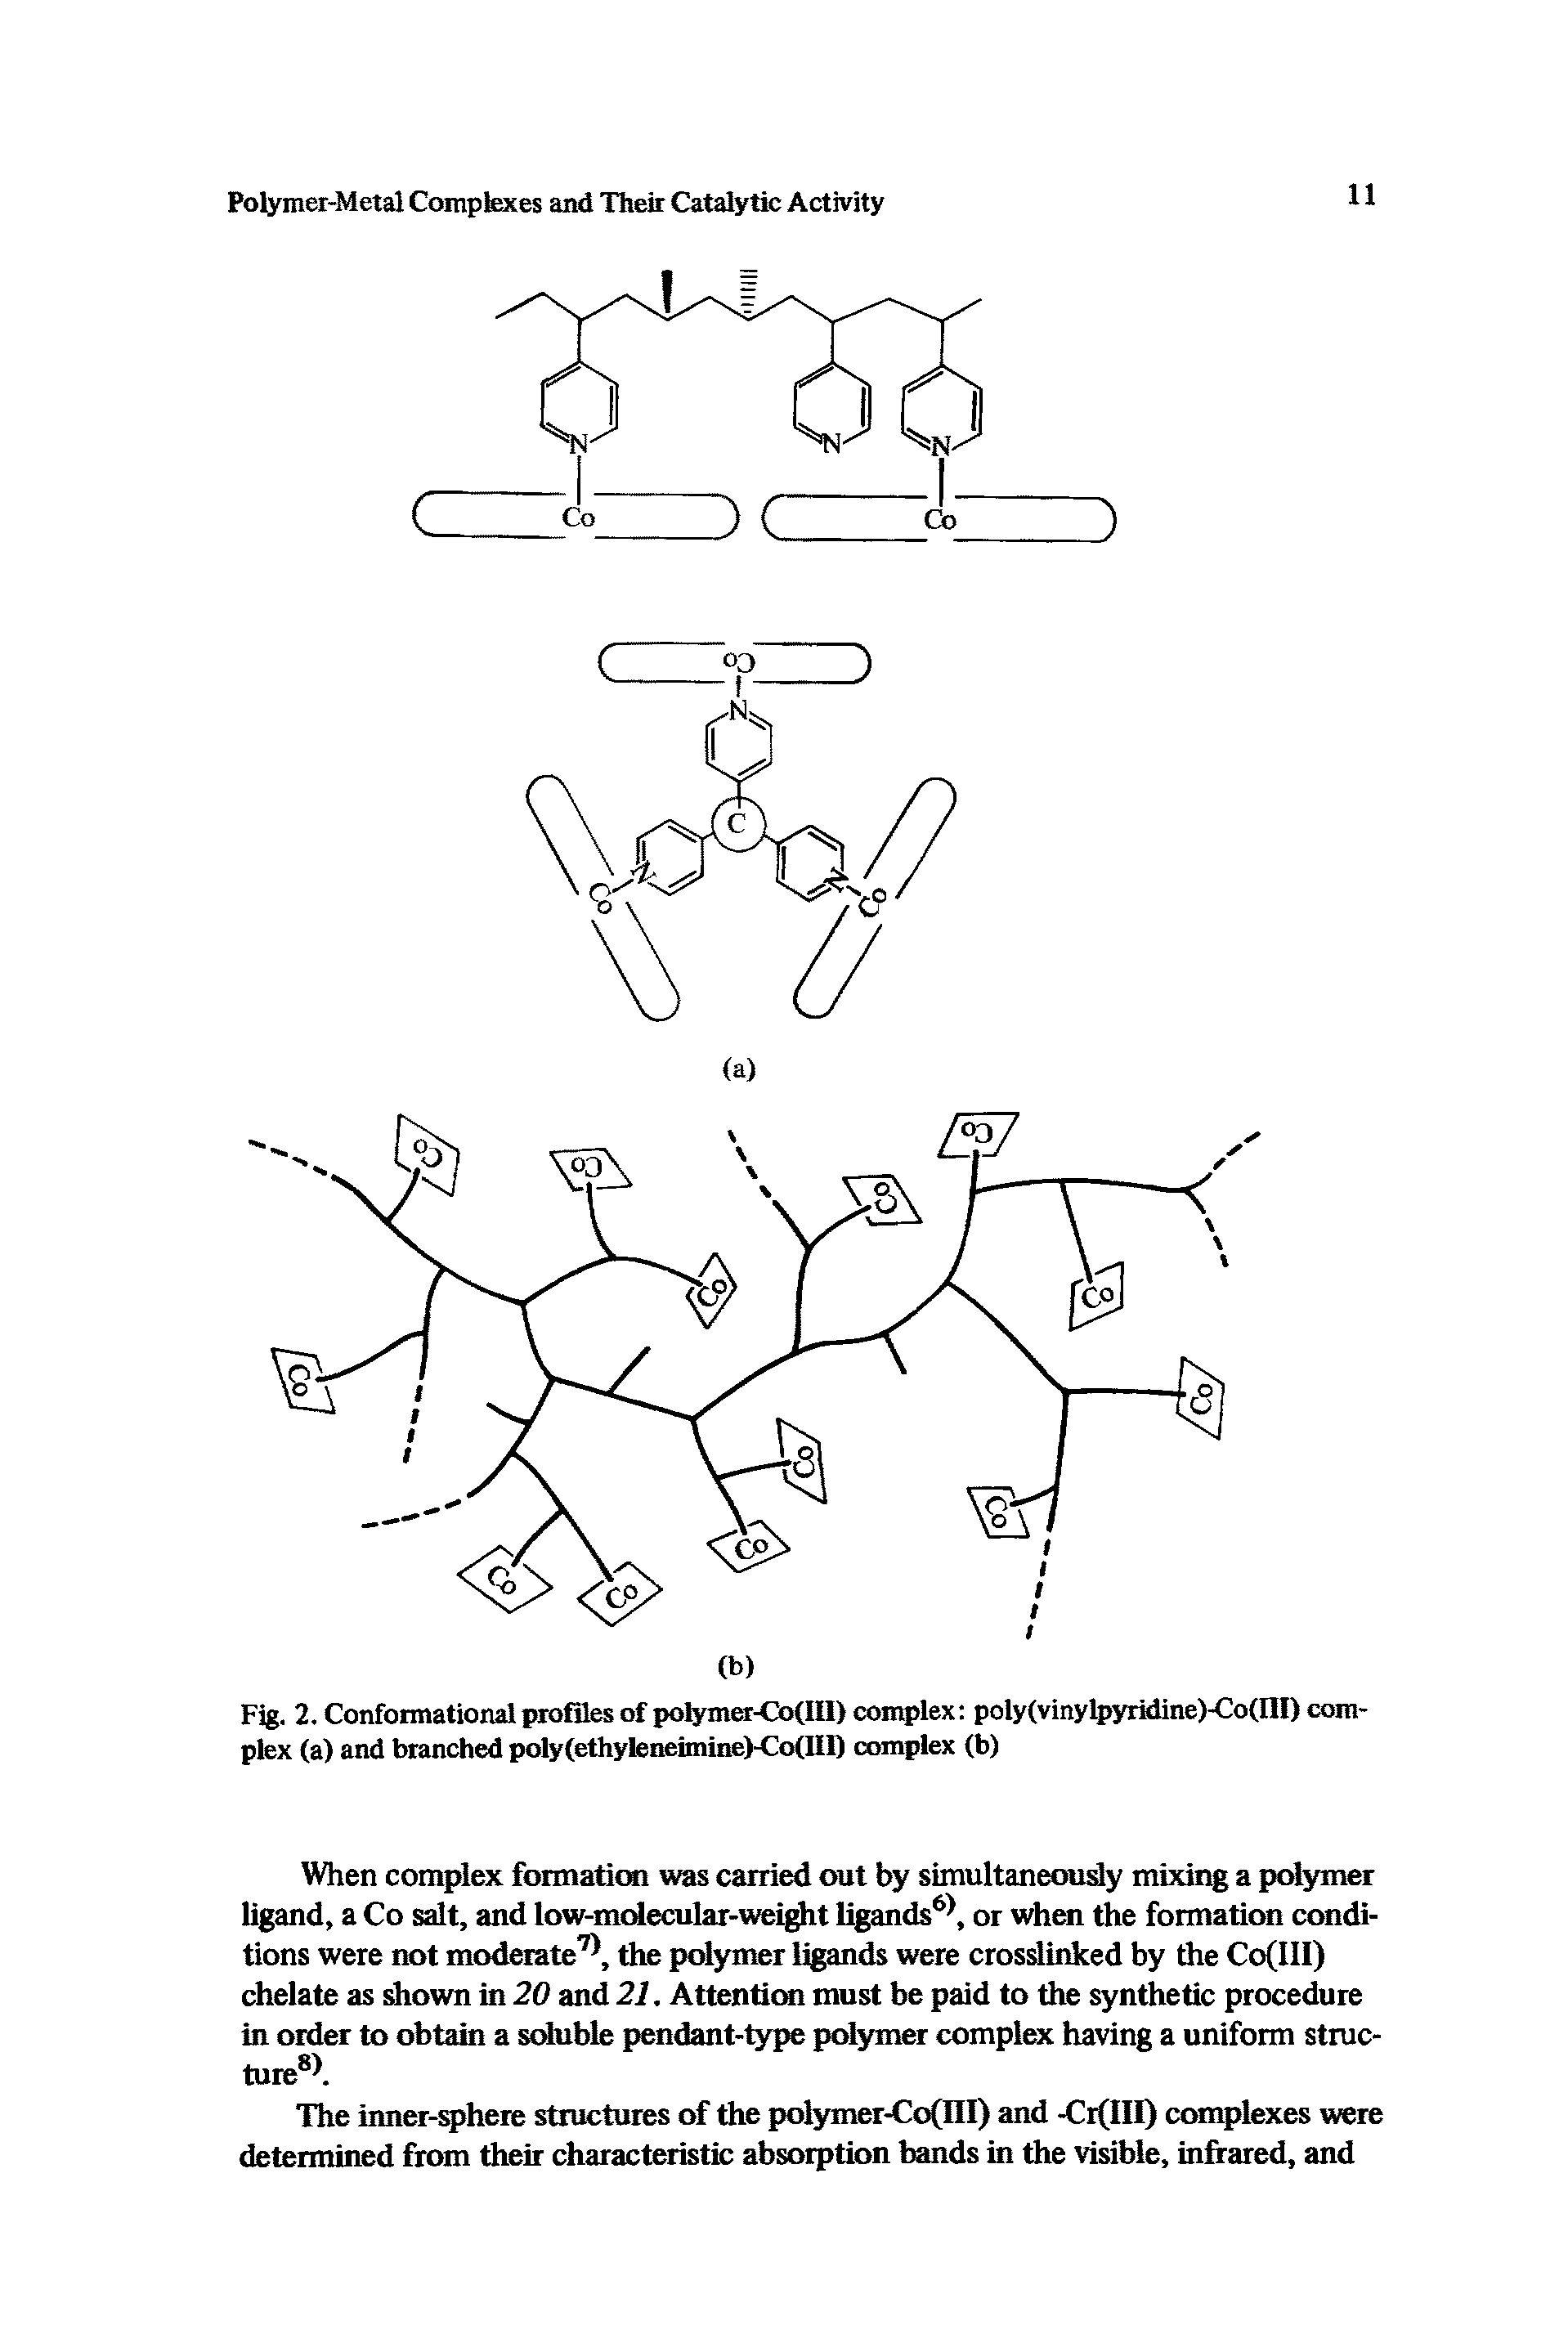 Fig. 2. Conformational profiles of polymer-Oo(IIl) complex poly(vinylpyridine)-Co(III) complex (a) and branched poly(ethyleneimine)-Co(IlI) complex (b)...